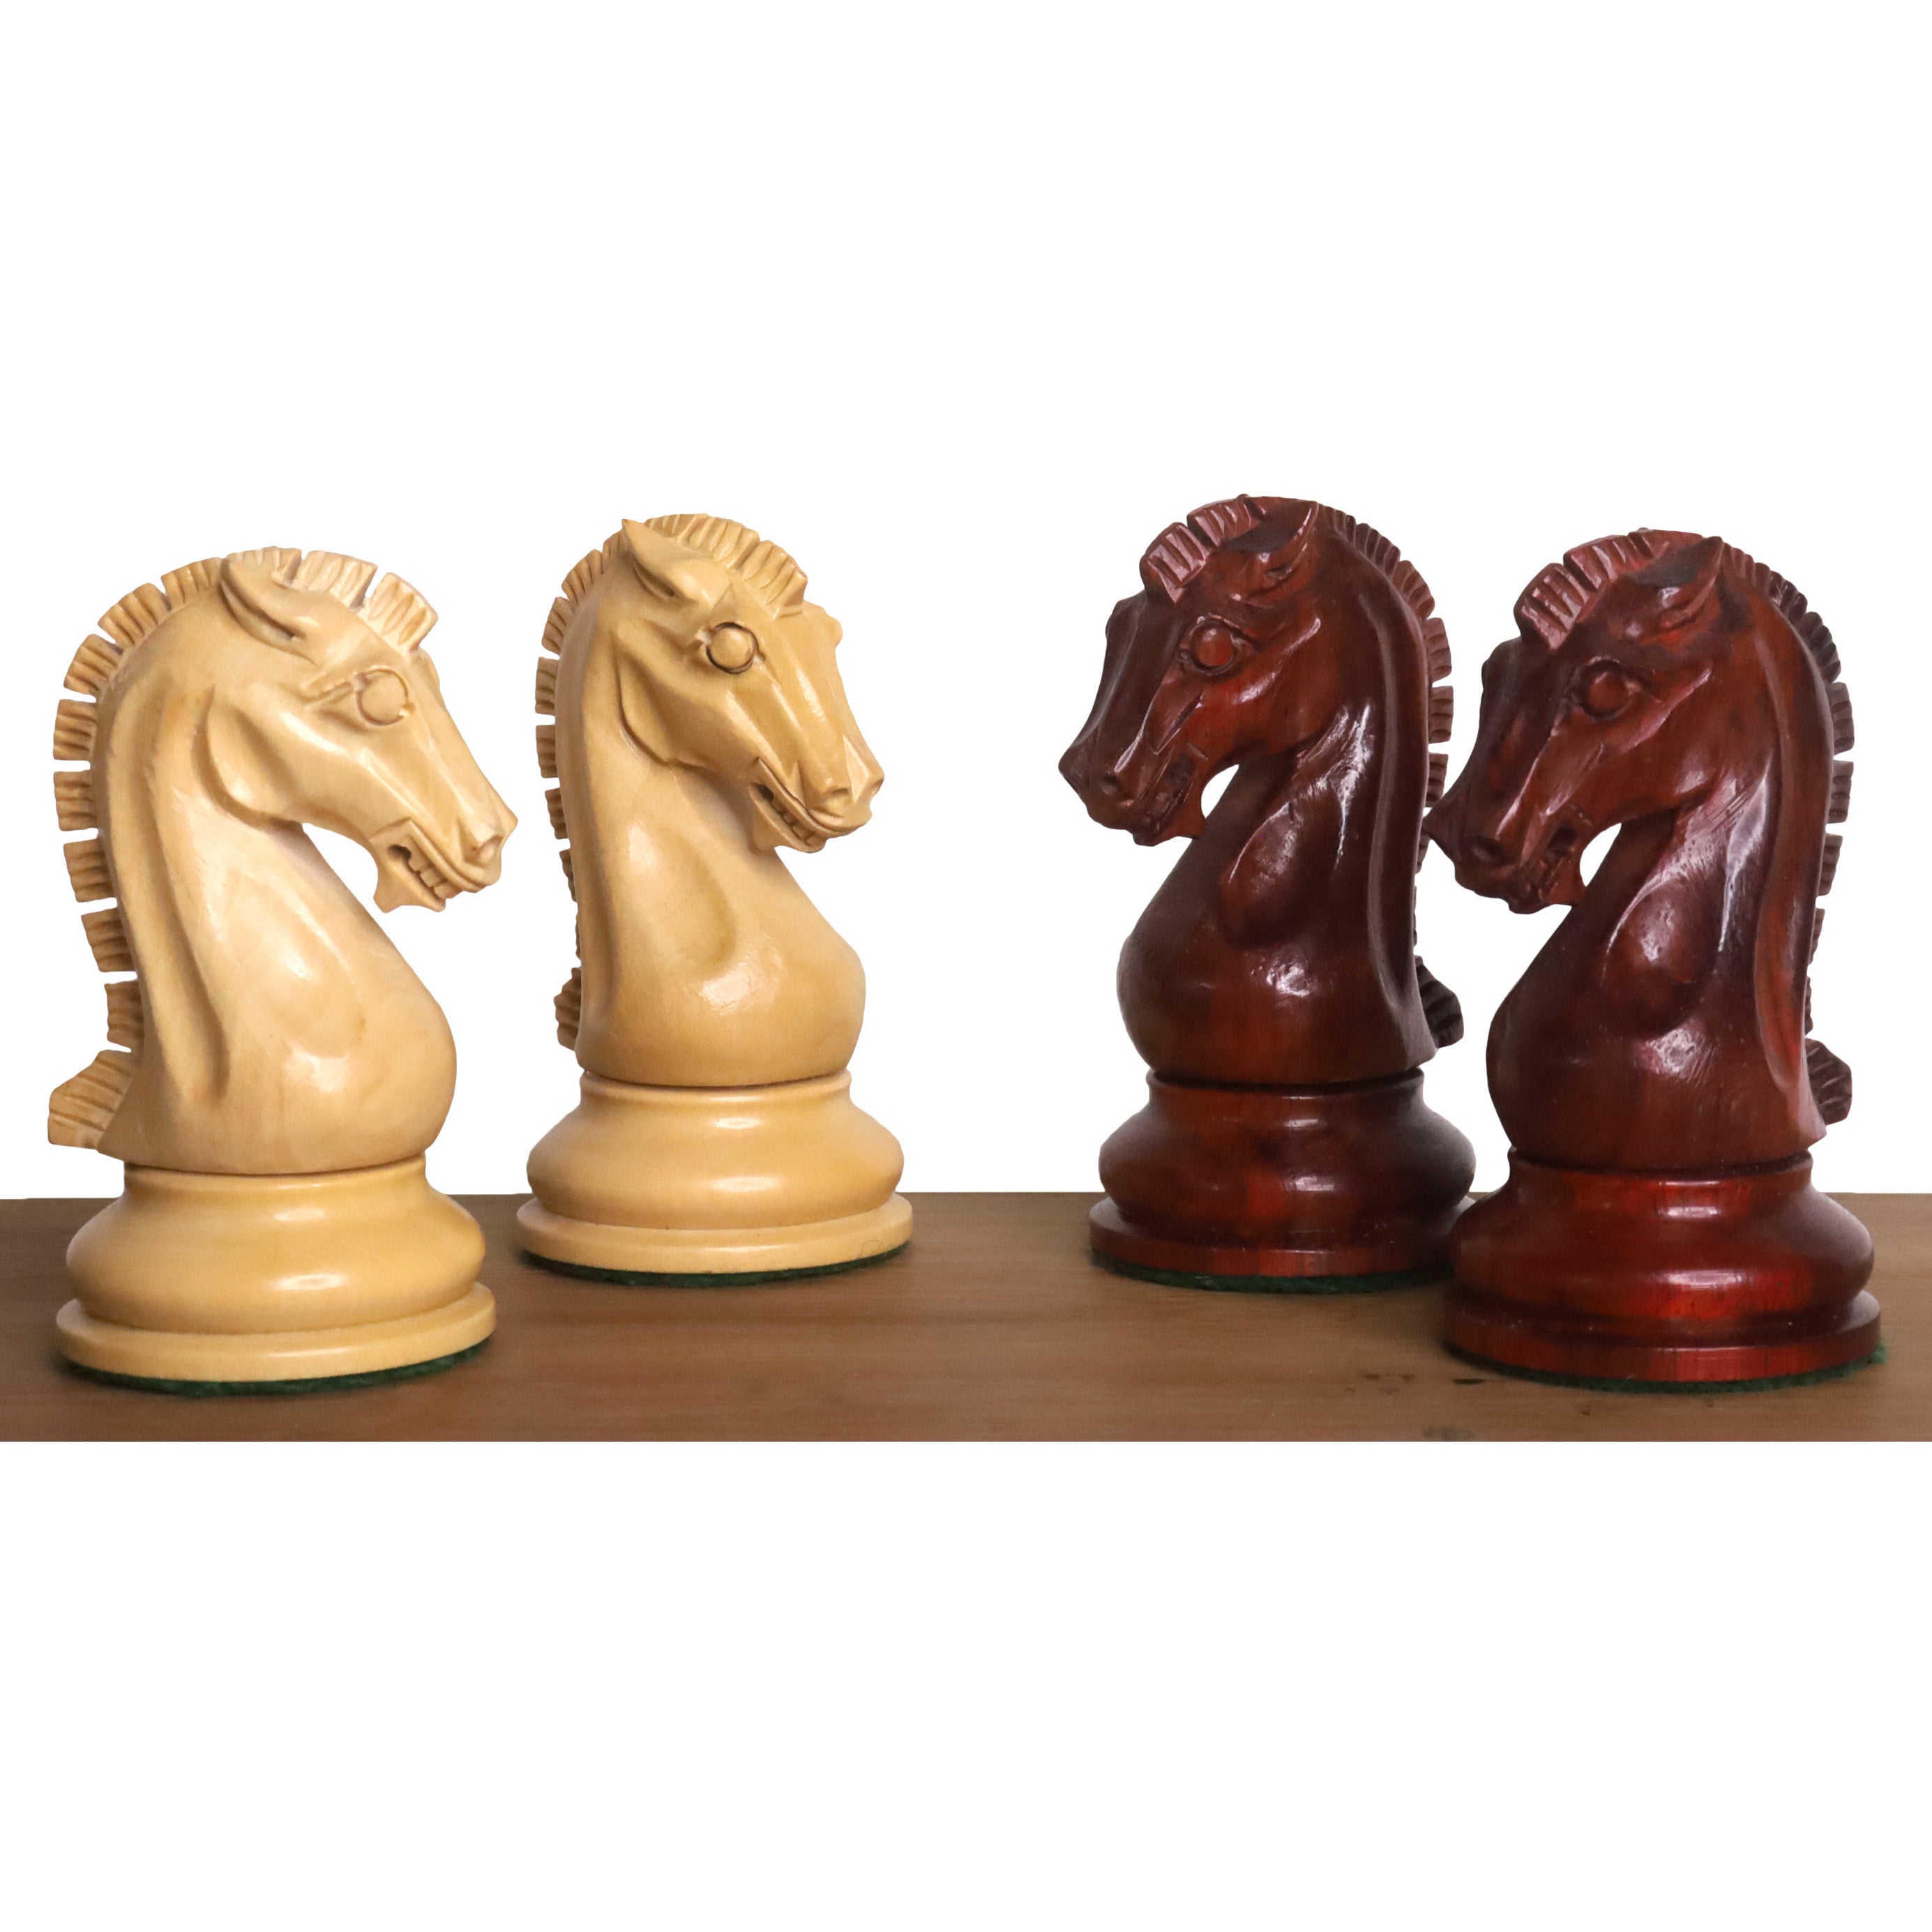 Slightly Imperfect 2021 Sinquefield Cup Reproduced Staunton Chess Pieces Only set - Triple weighted Bud Rosewood